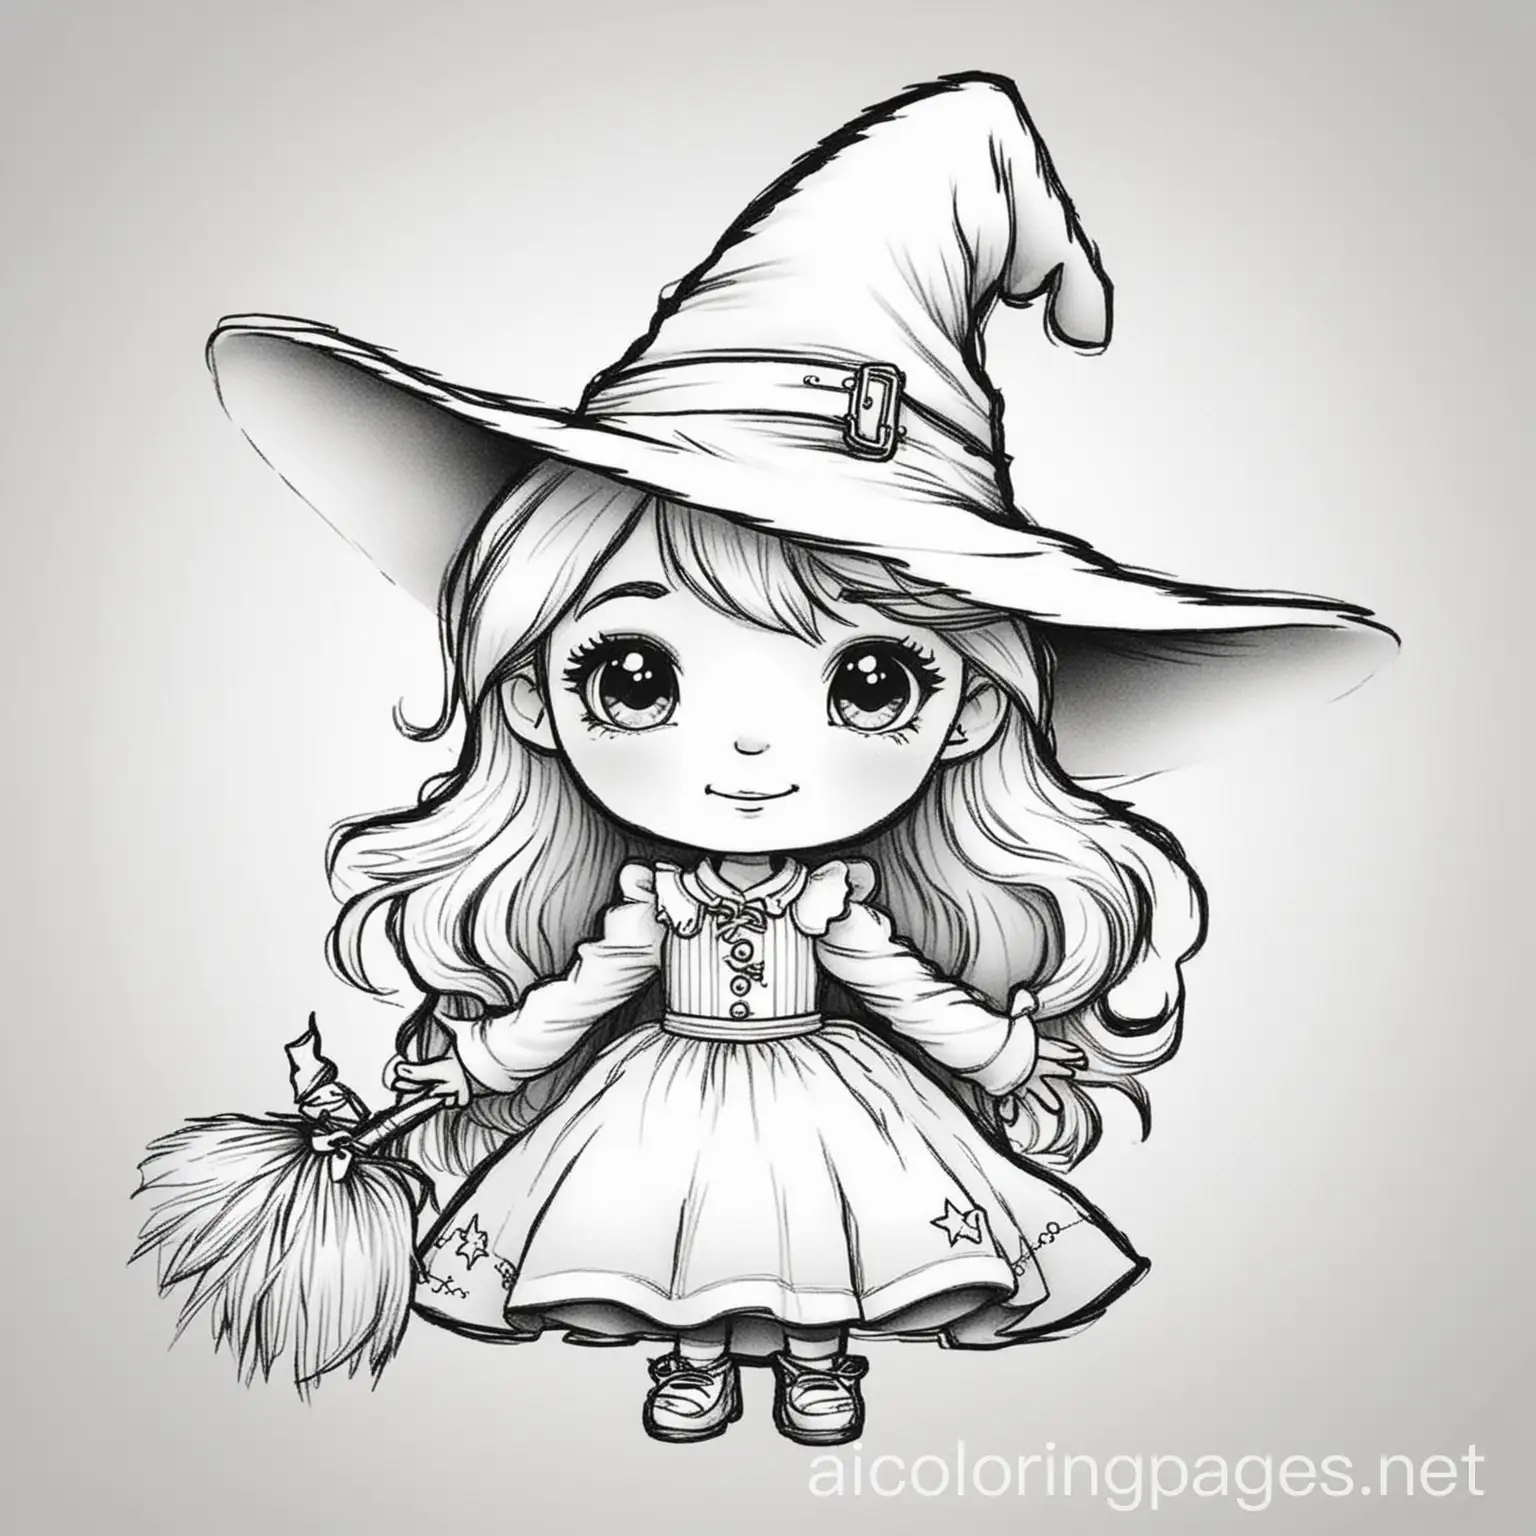 A cute little witch, Coloring Page, black and white, line art, white background, Simplicity, Ample White Space. The background of the coloring page is plain white to make it easy for young children to color within the lines. The outlines of all the subjects are easy to distinguish, making it simple for kids to color without too much difficulty